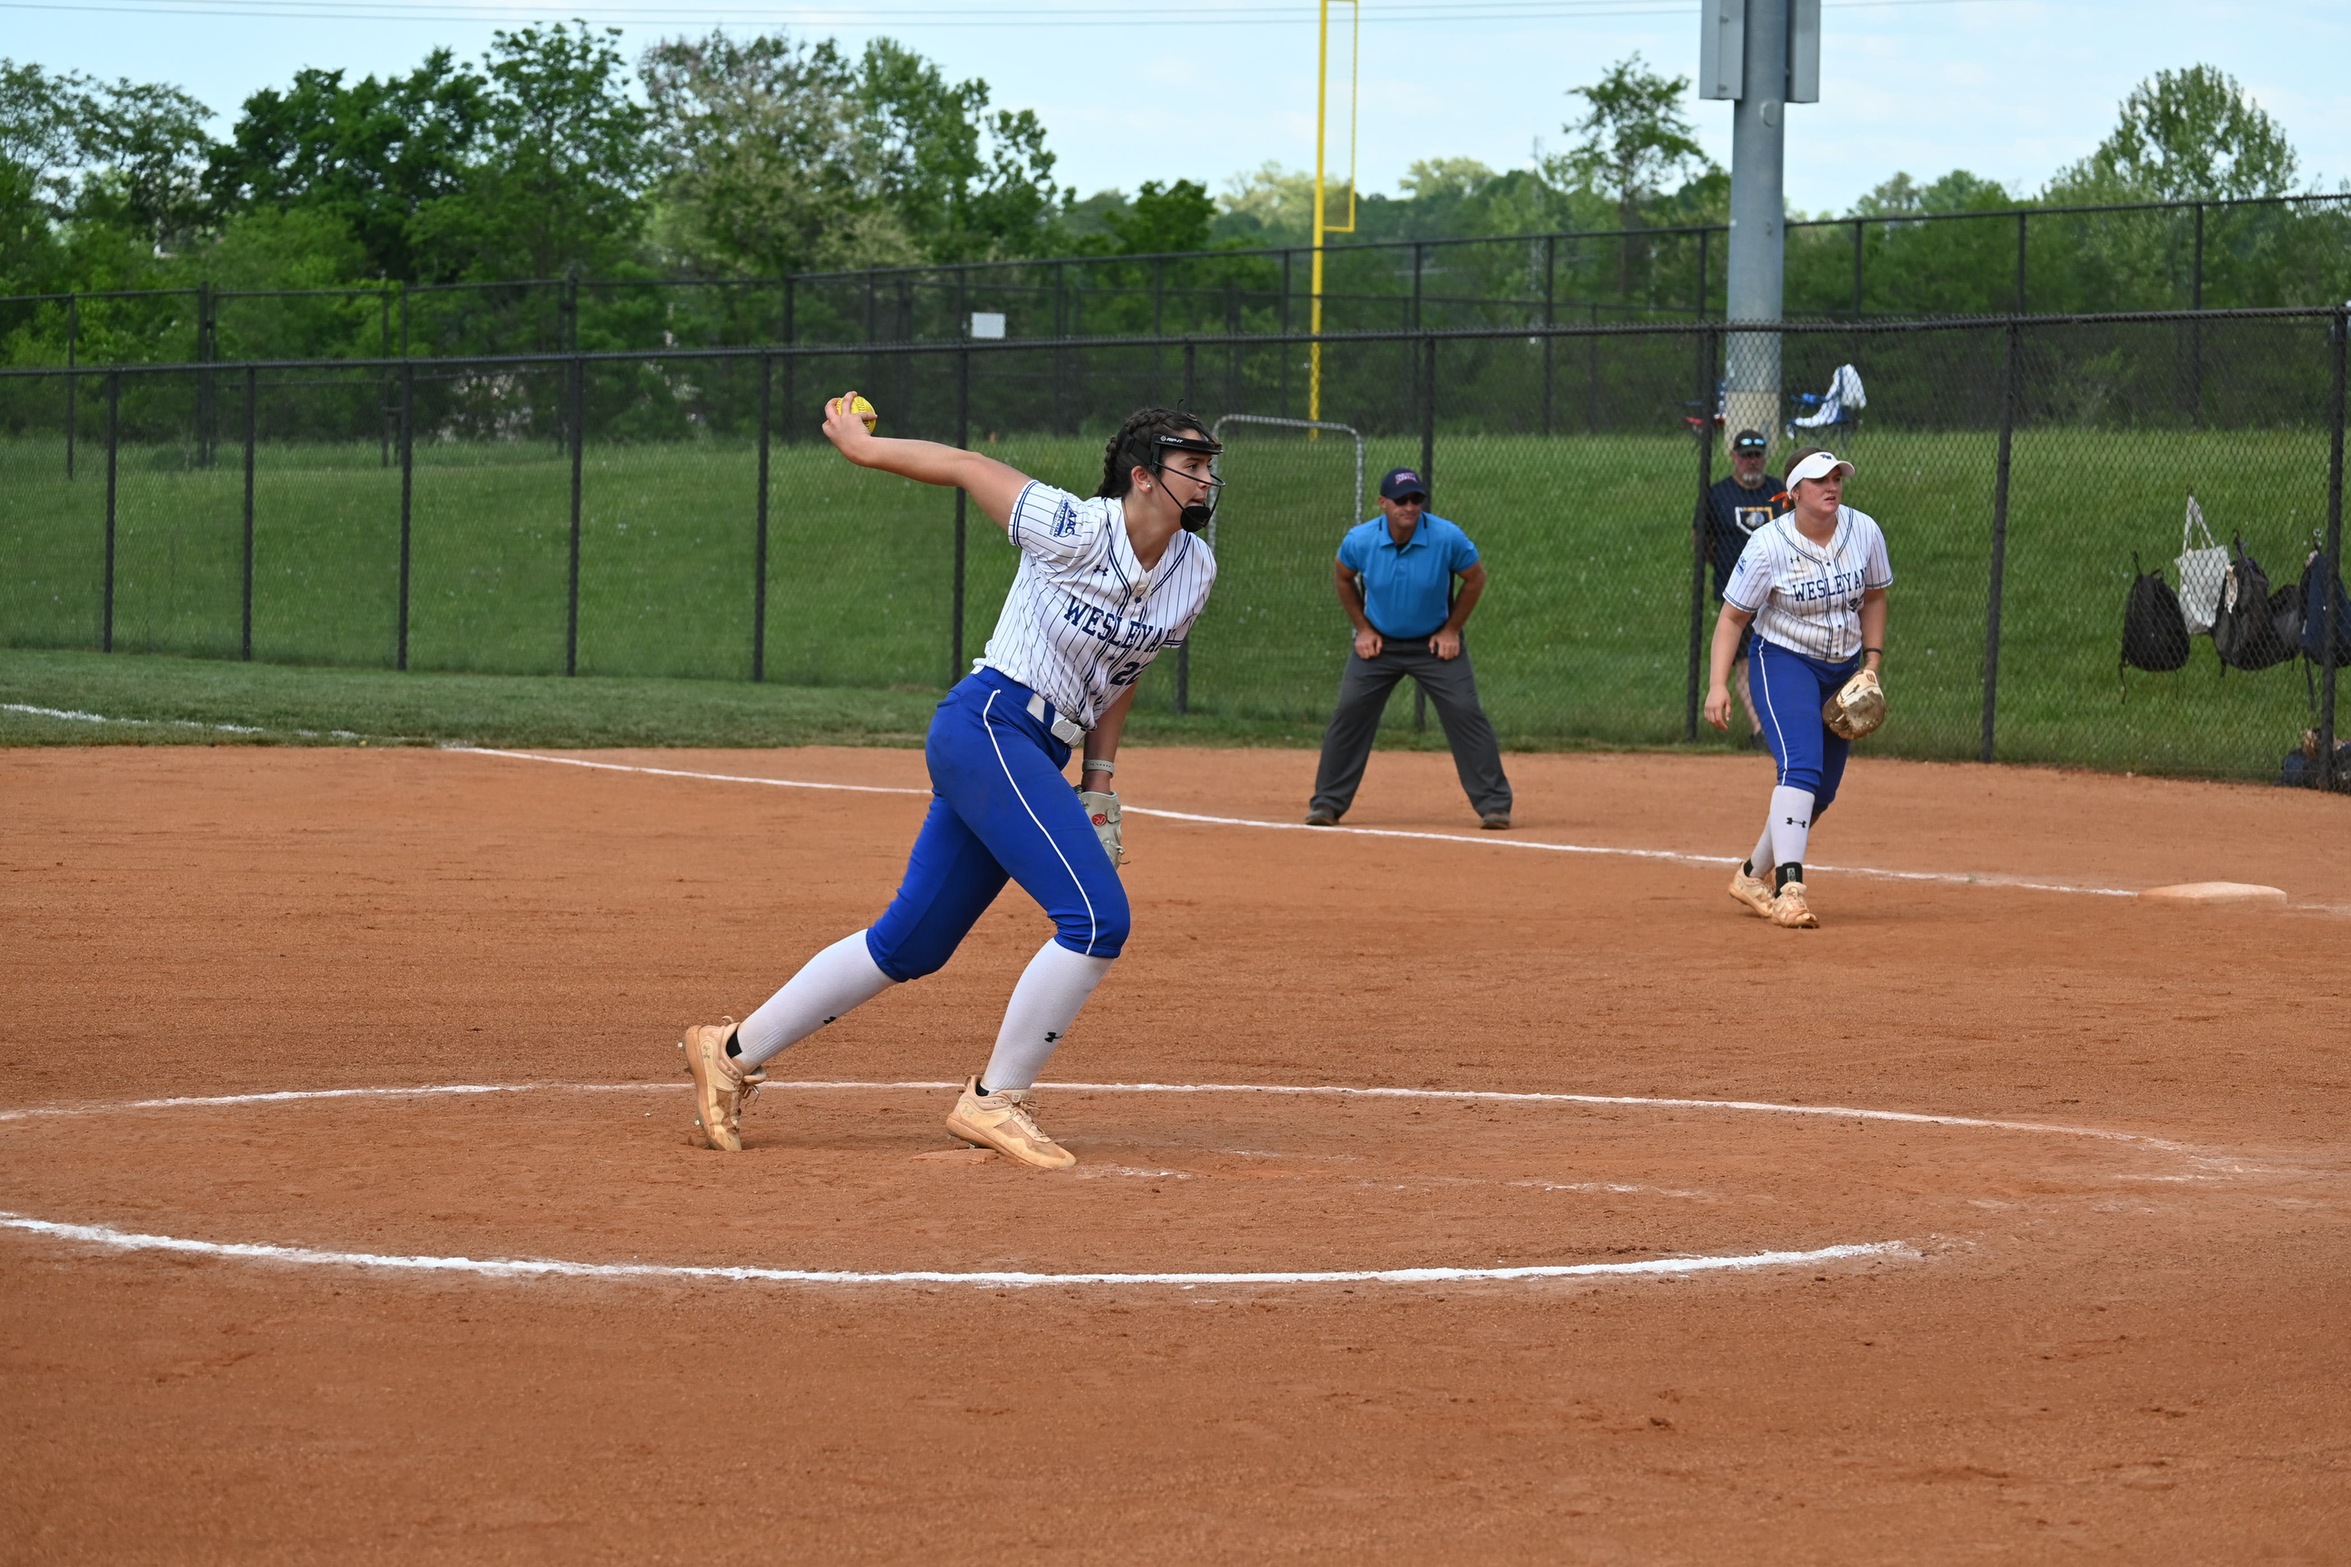 No. 3 Seed Softball Unable to Complete Comeback Against No. 1 Seed Reinhardt